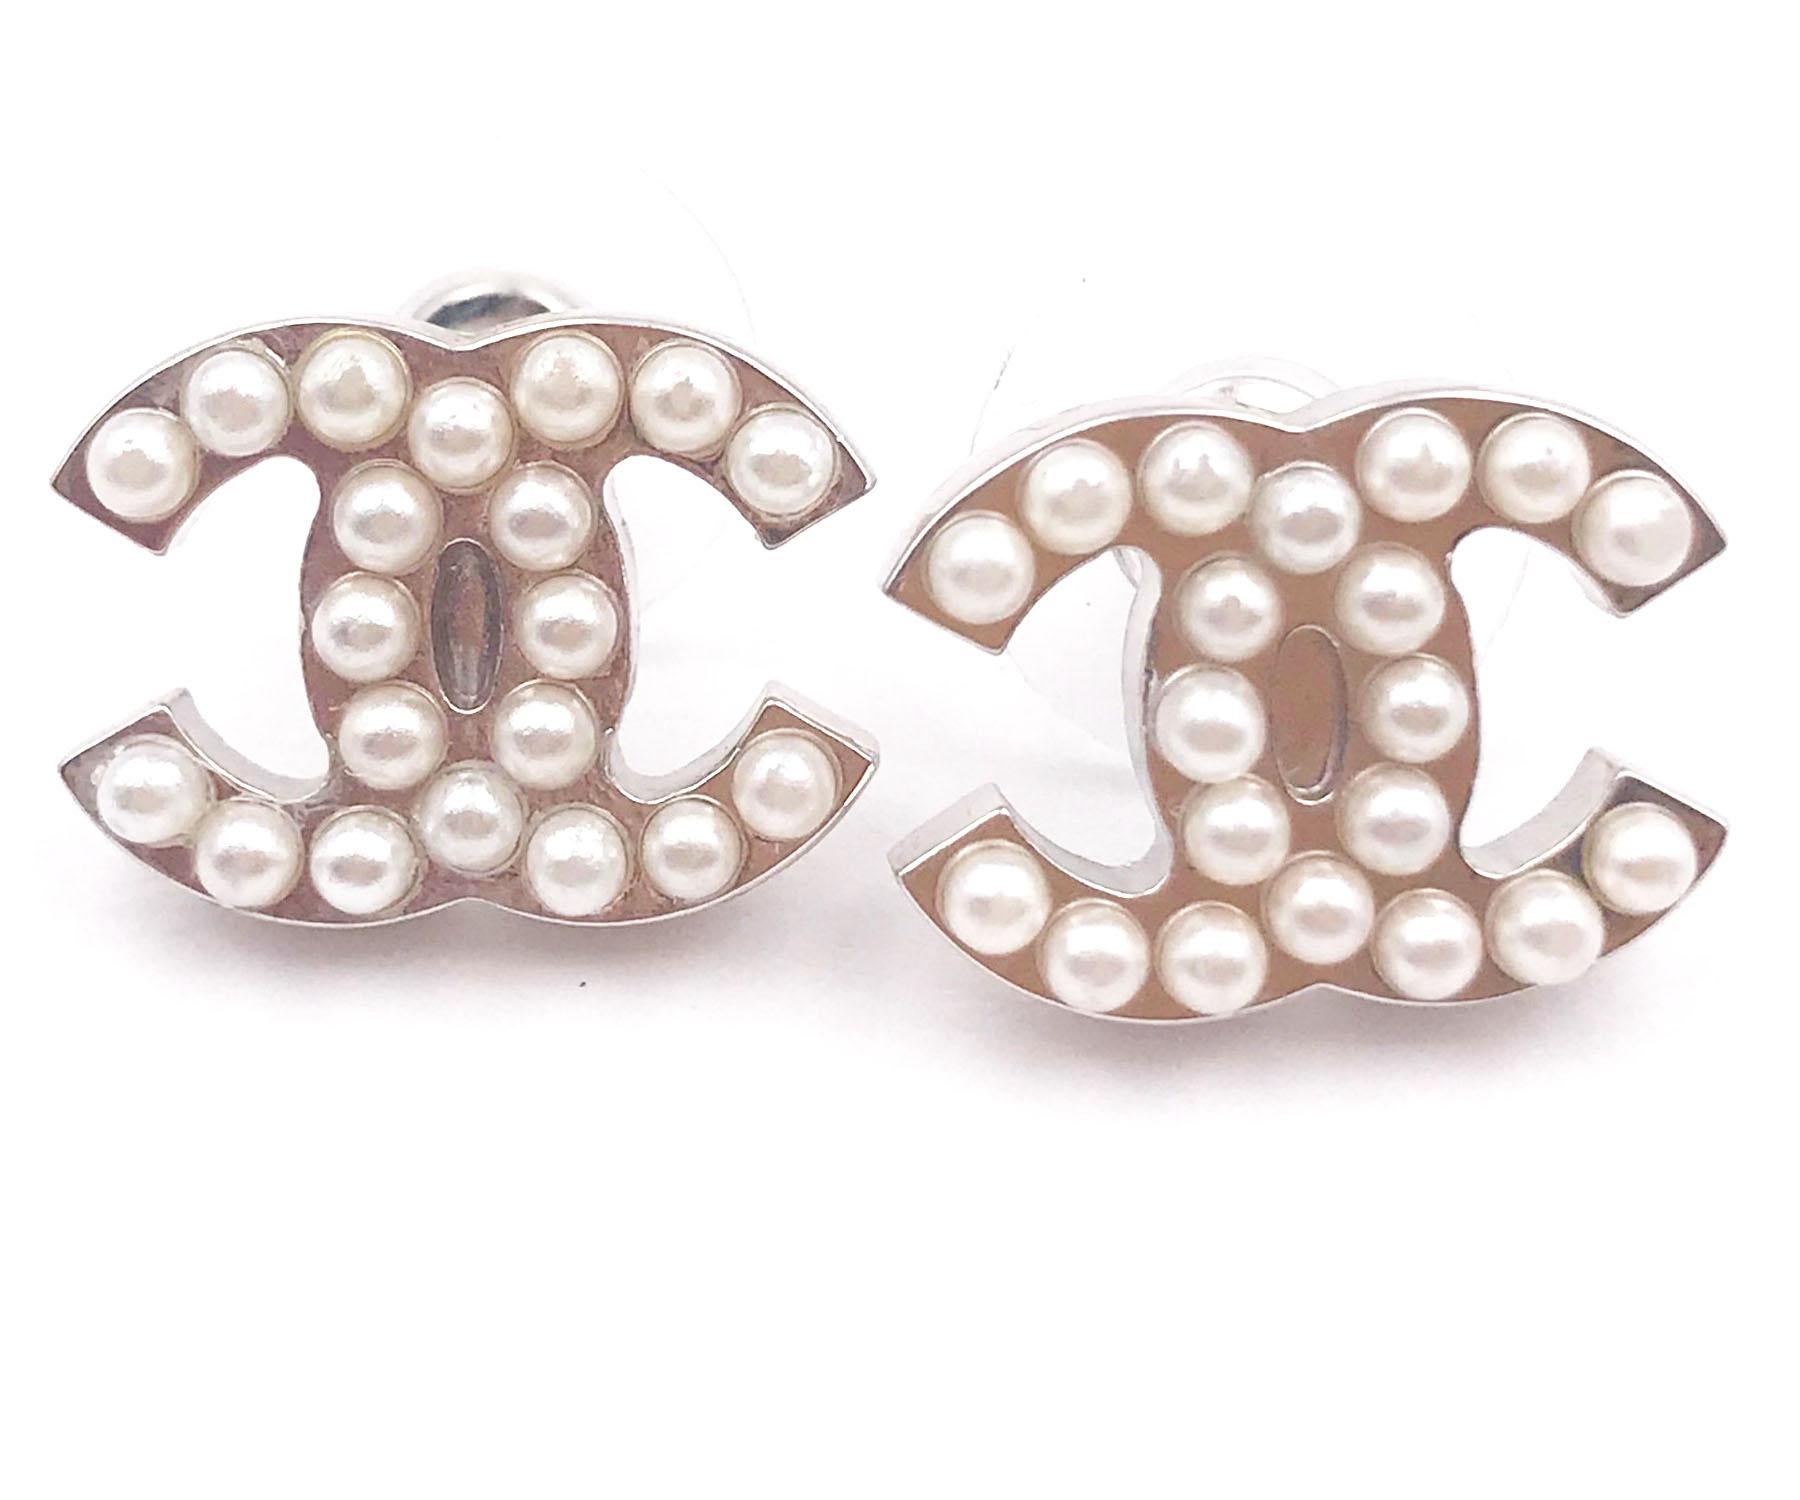 Chanel Classic Silver CC Faux Pearl Piercing Earrings

* Marked 05
* Made in France
* Comes with the original box

-Approximately 0.6